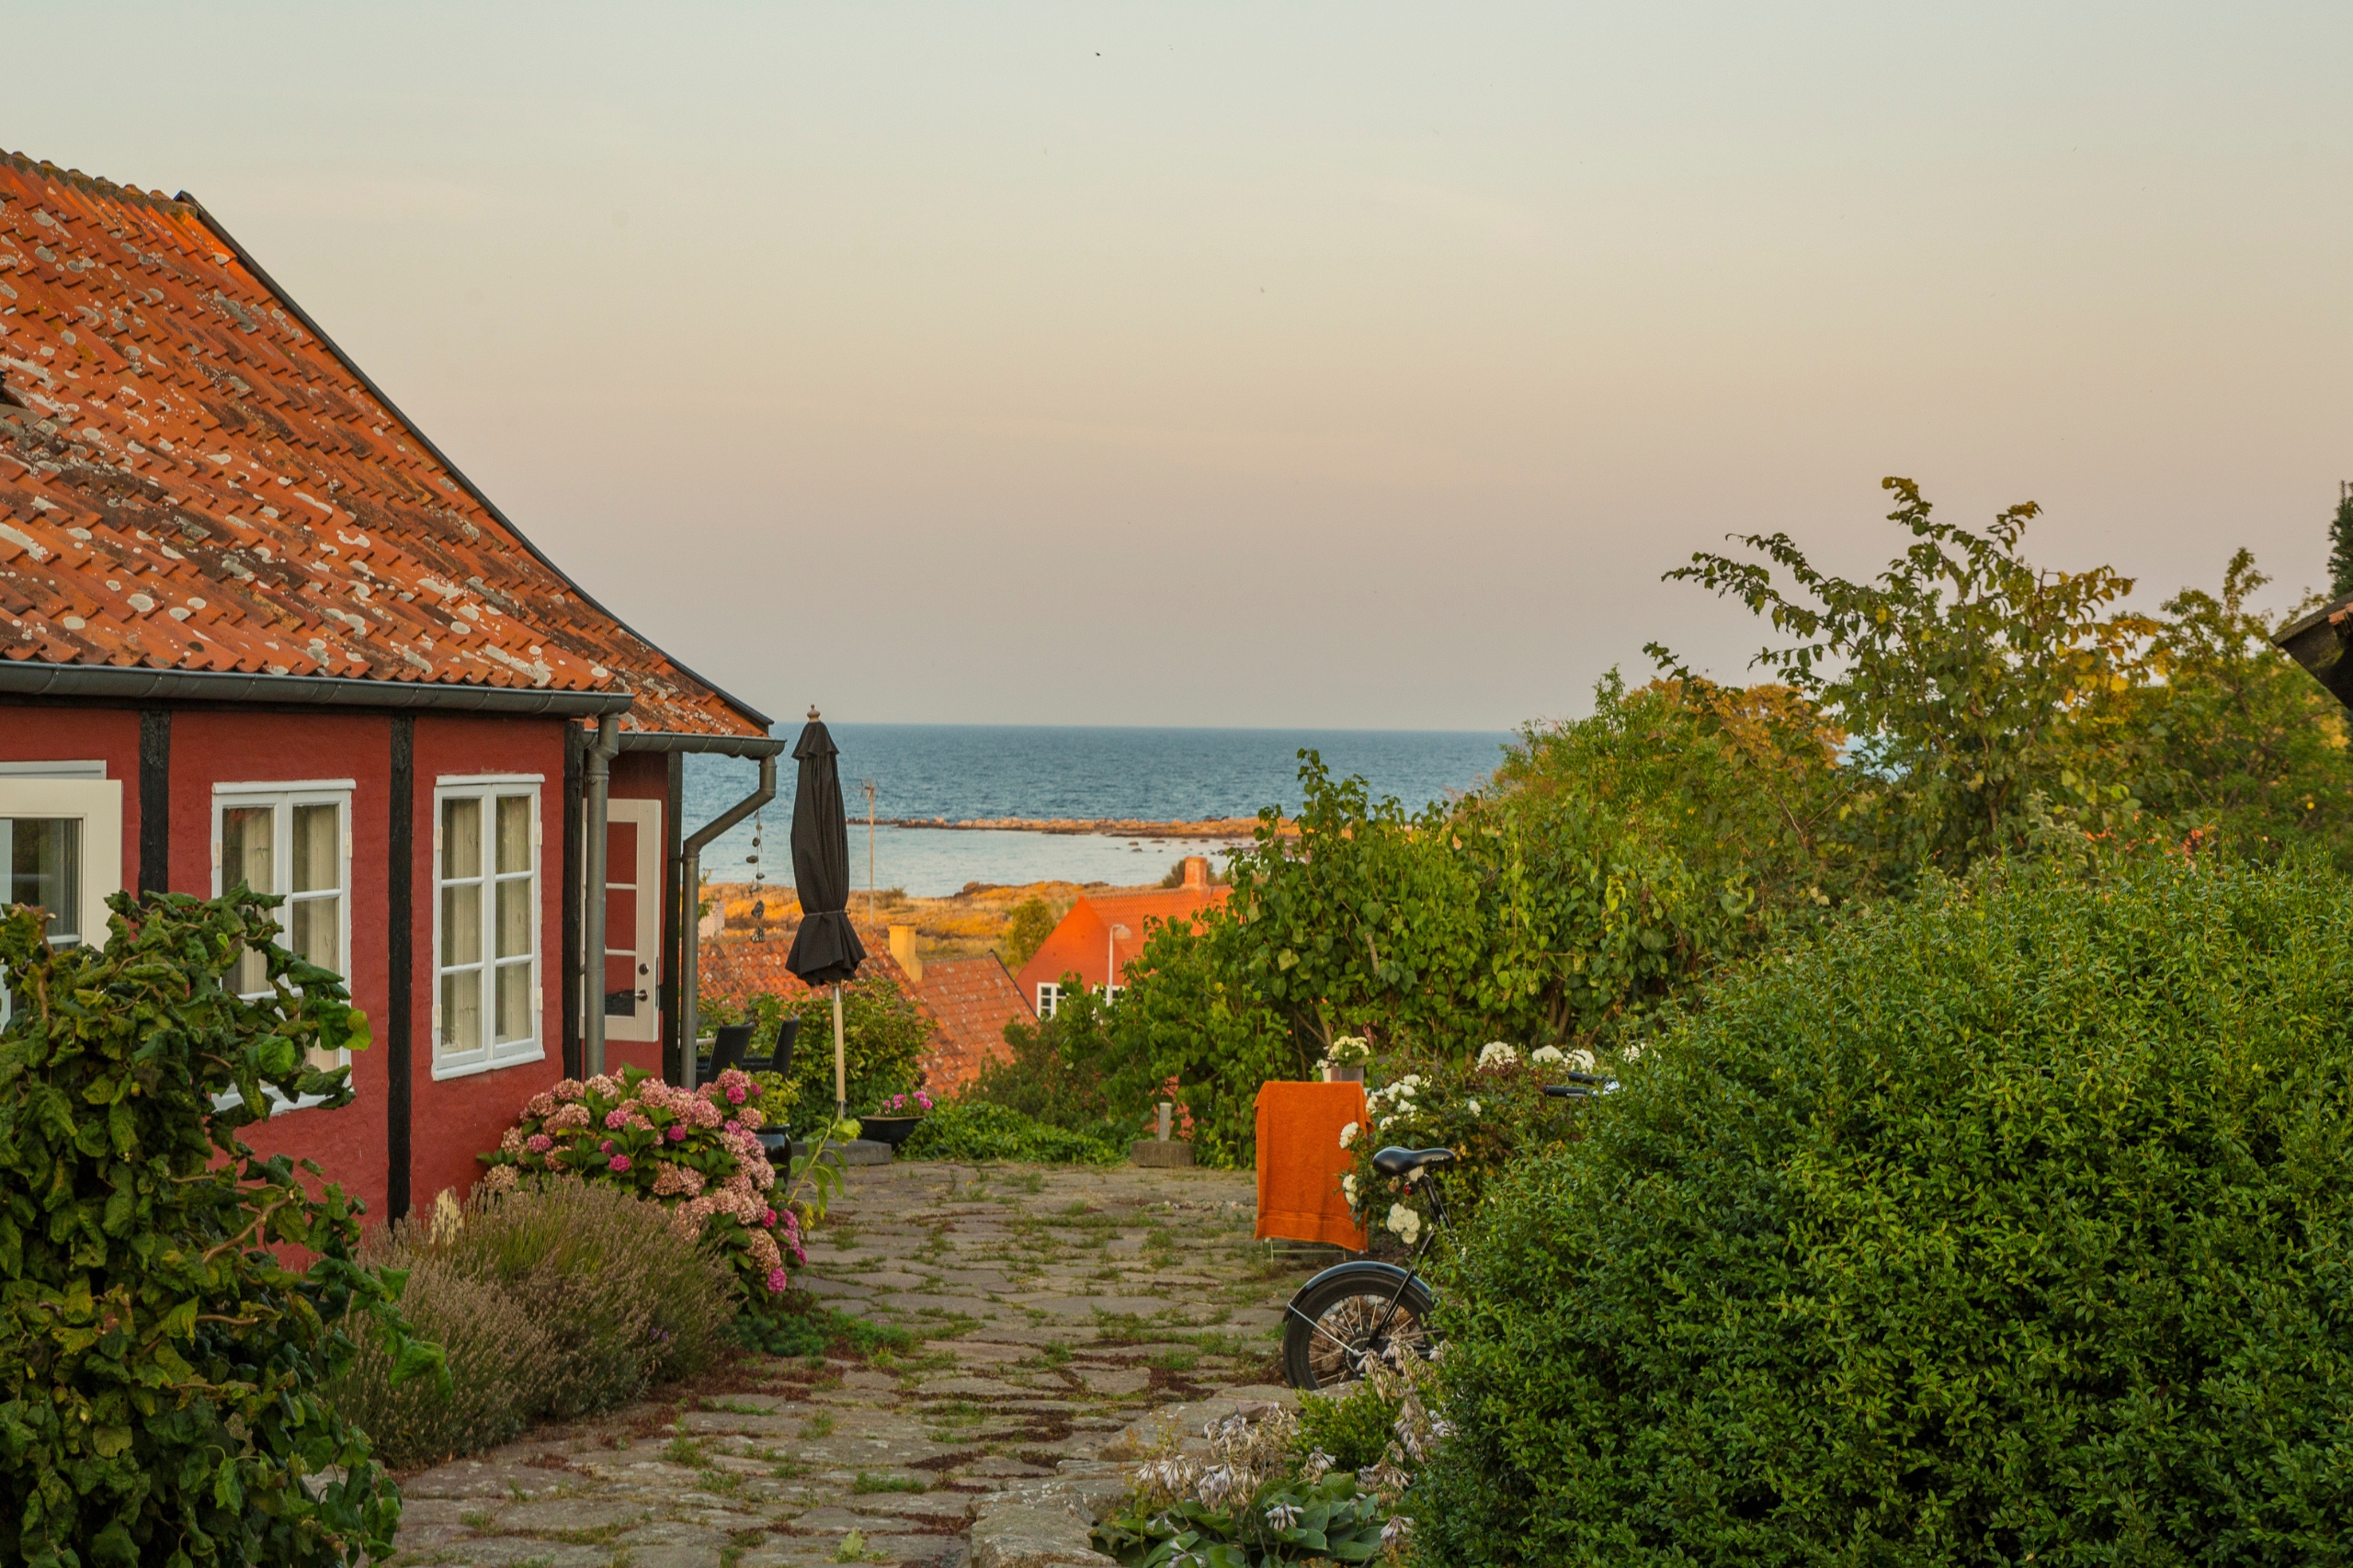  In the vicinity of Hullehavn Camping, you will find many idyllic postcard motifs that radiate a real holiday feeling. 